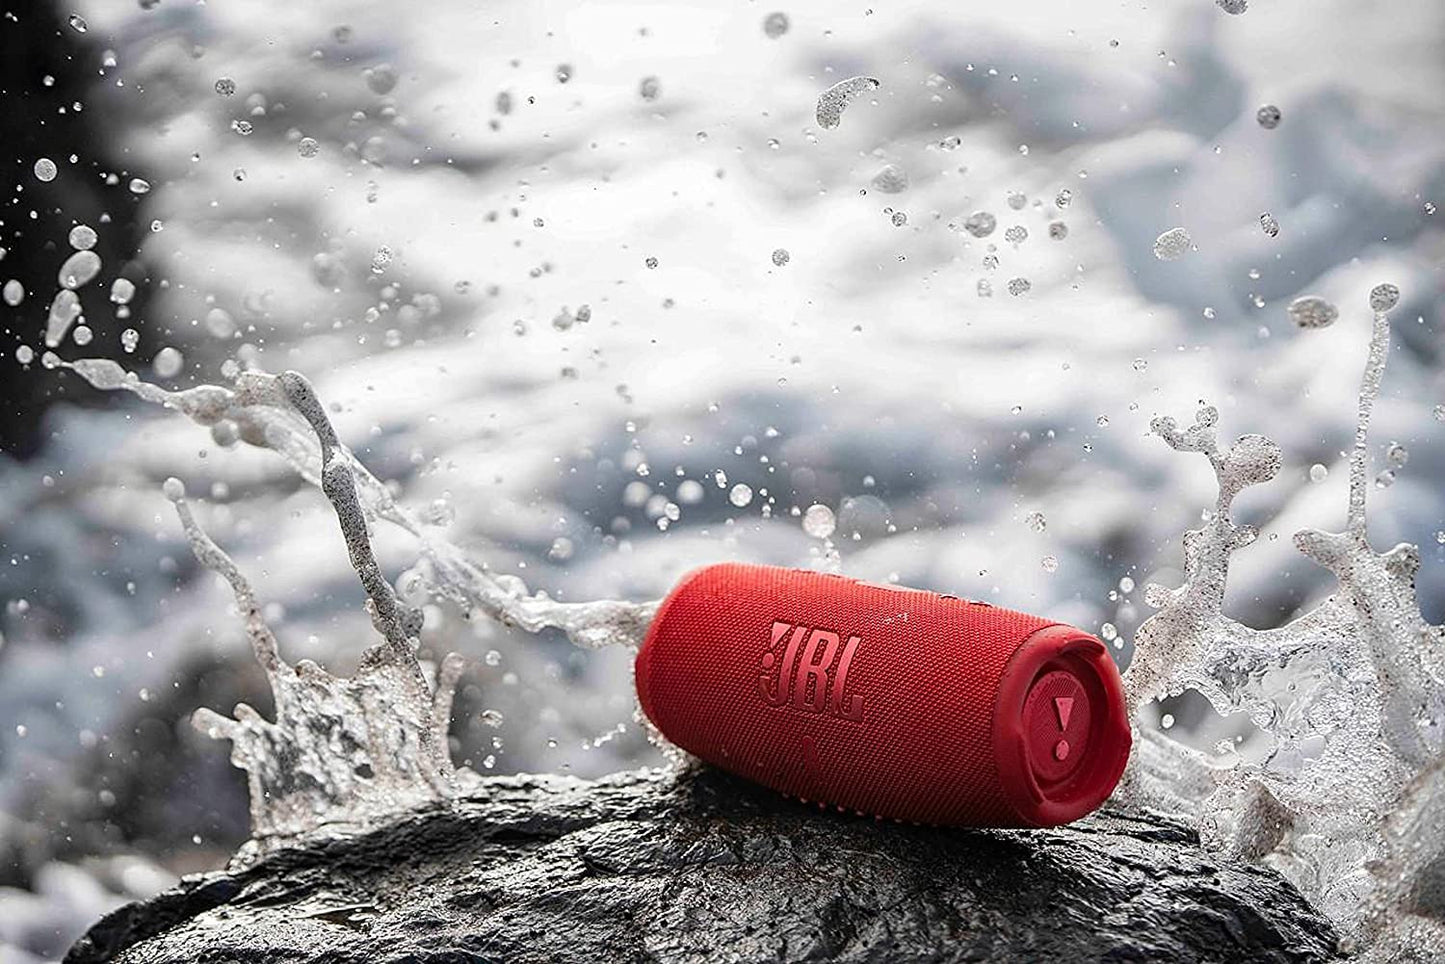 JBL Charge 5 Bluetooth Speakers (Red)